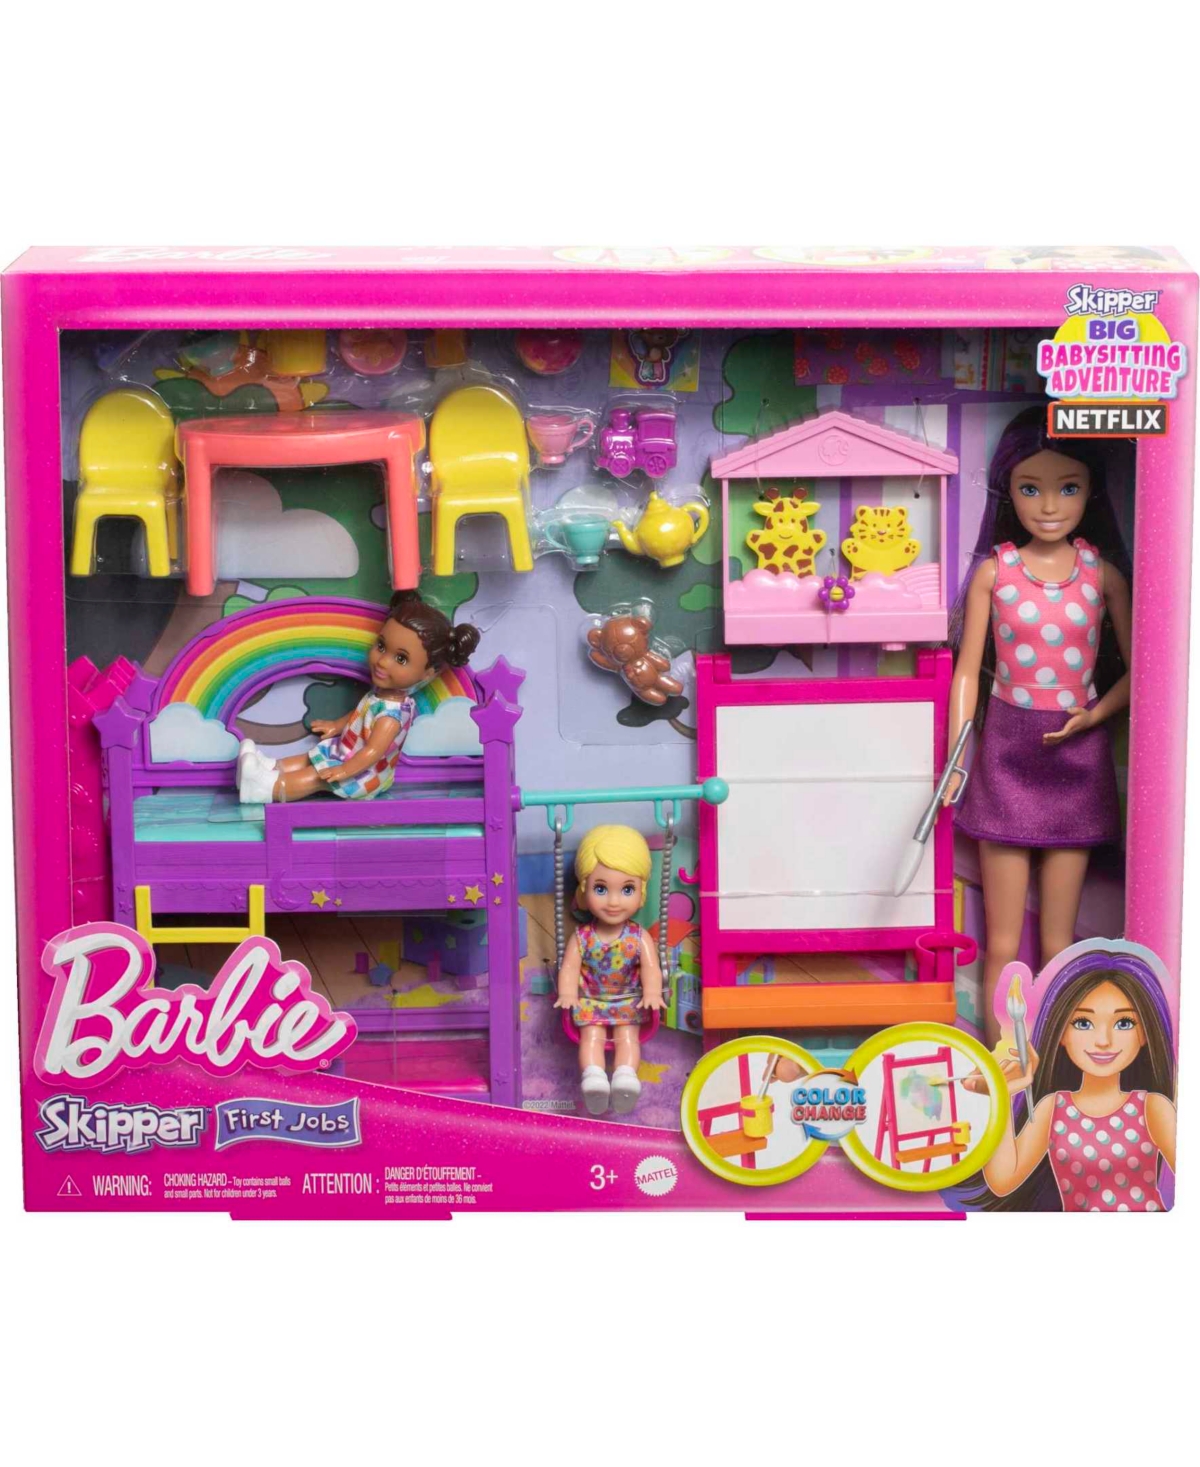 Shop Barbie Skipper First Jobs Daycare Playset With 3 Dolls, Furniture & Accessories In Multi-color